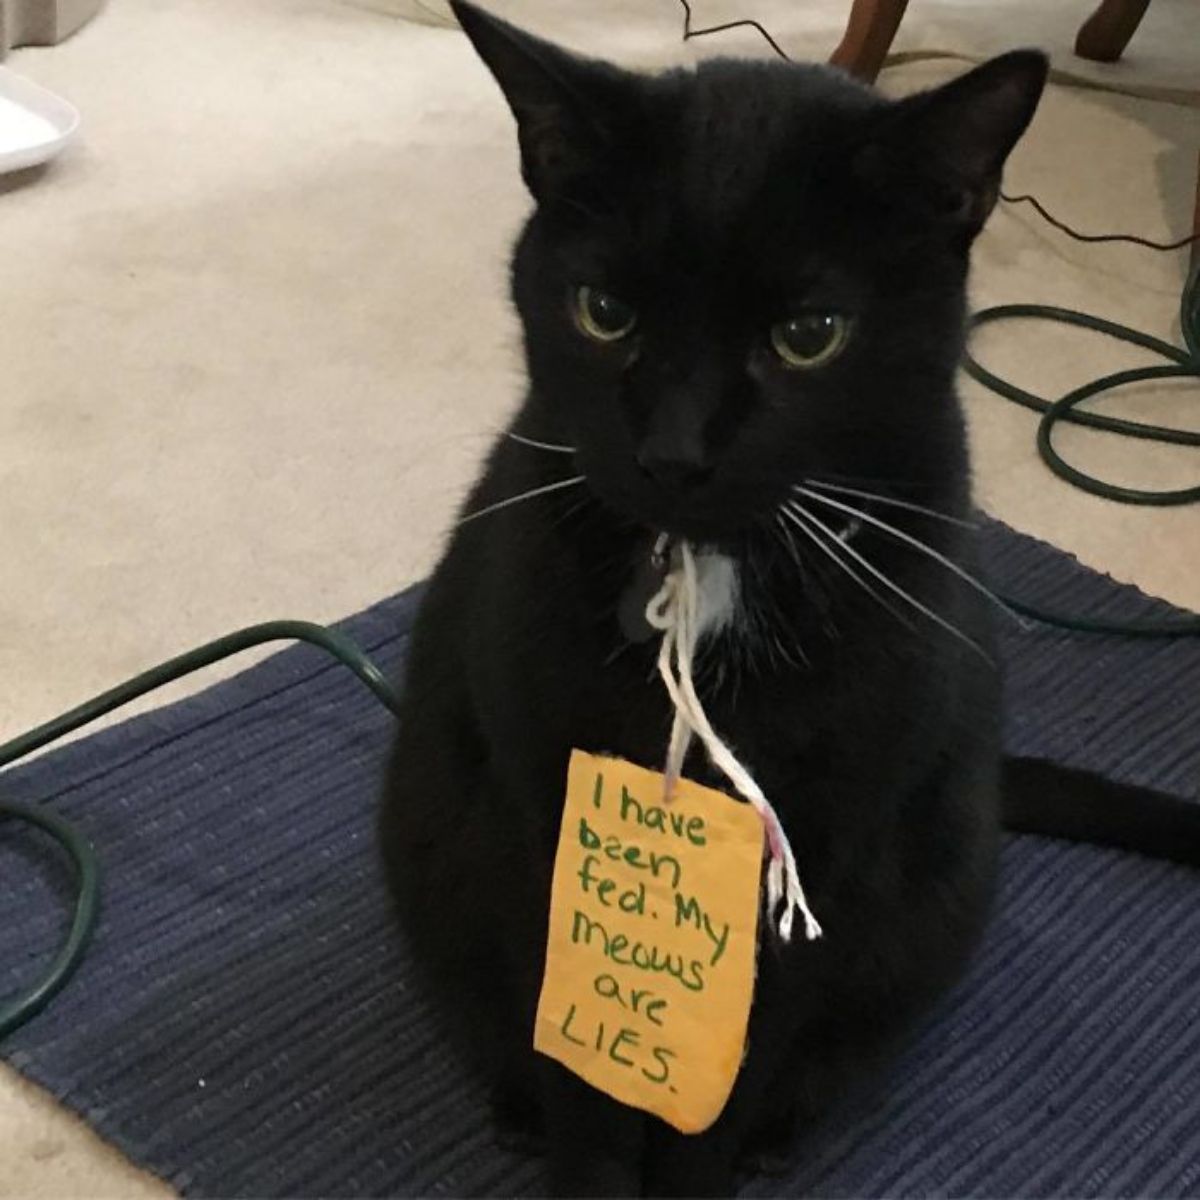 black cat sitting on a black mat with a note saying "I have been fed. My meows are LIES"